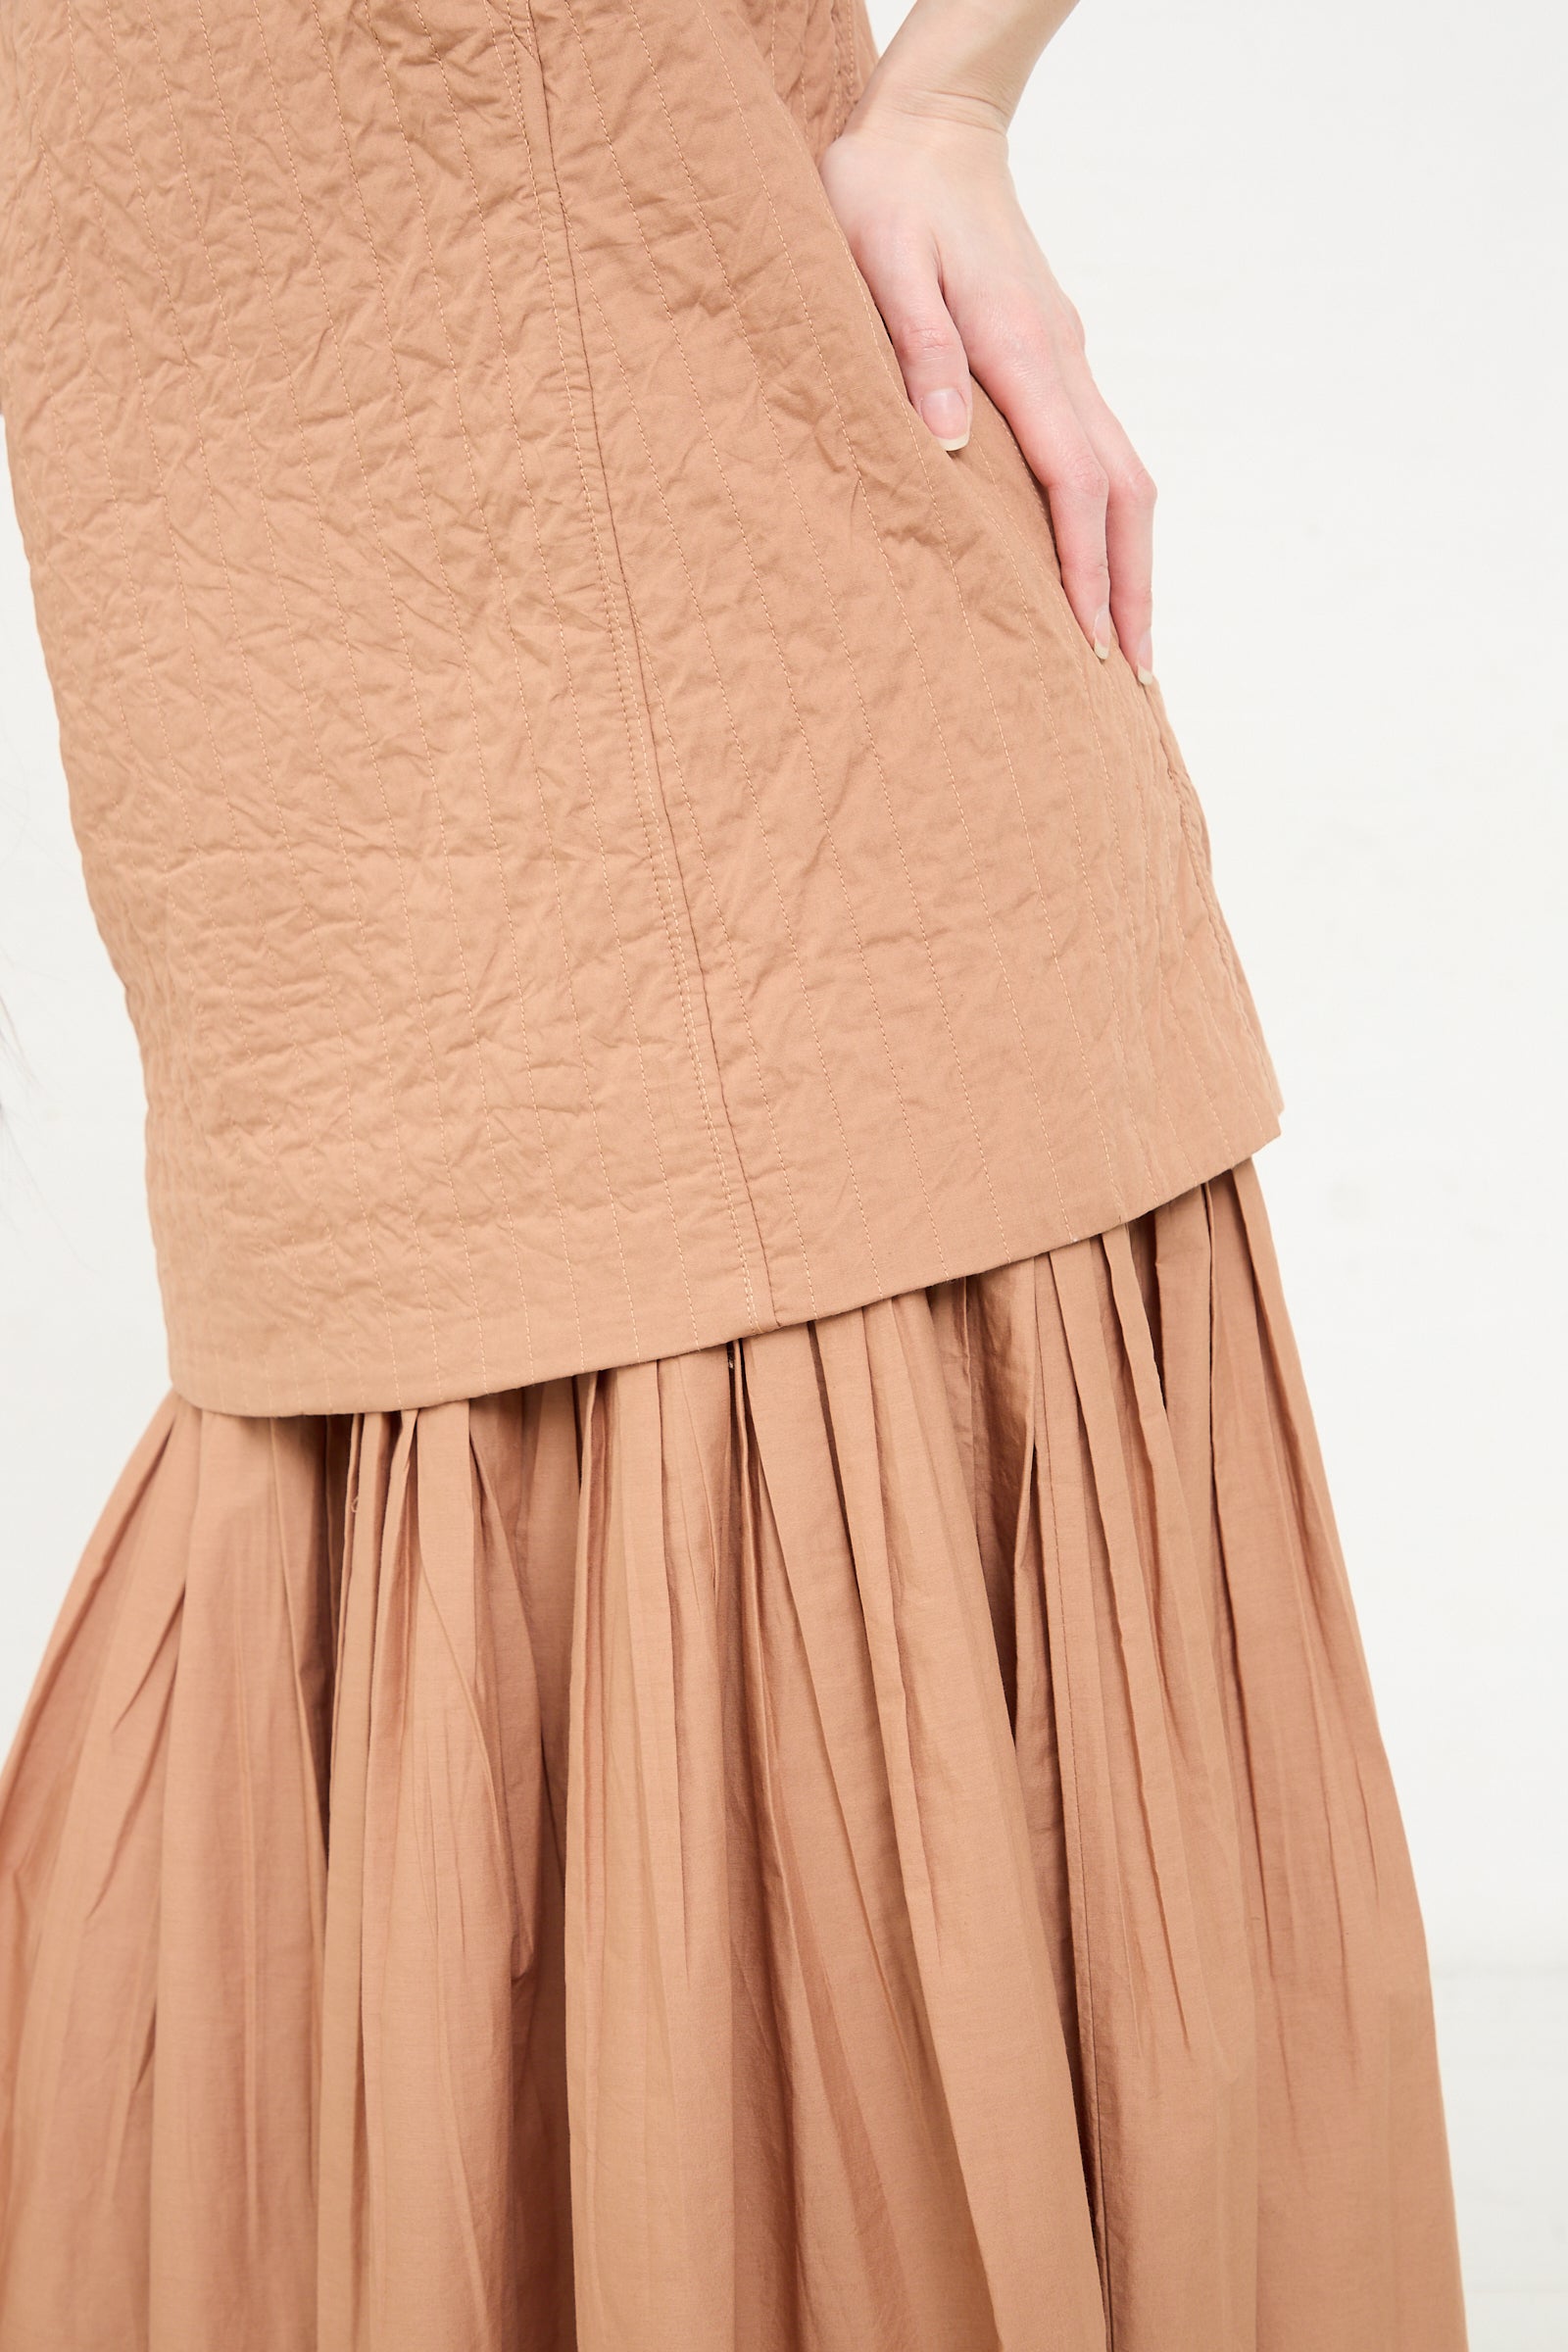 A close-up of a person modeling a Calin Dress in Camel by Rachel Comey.